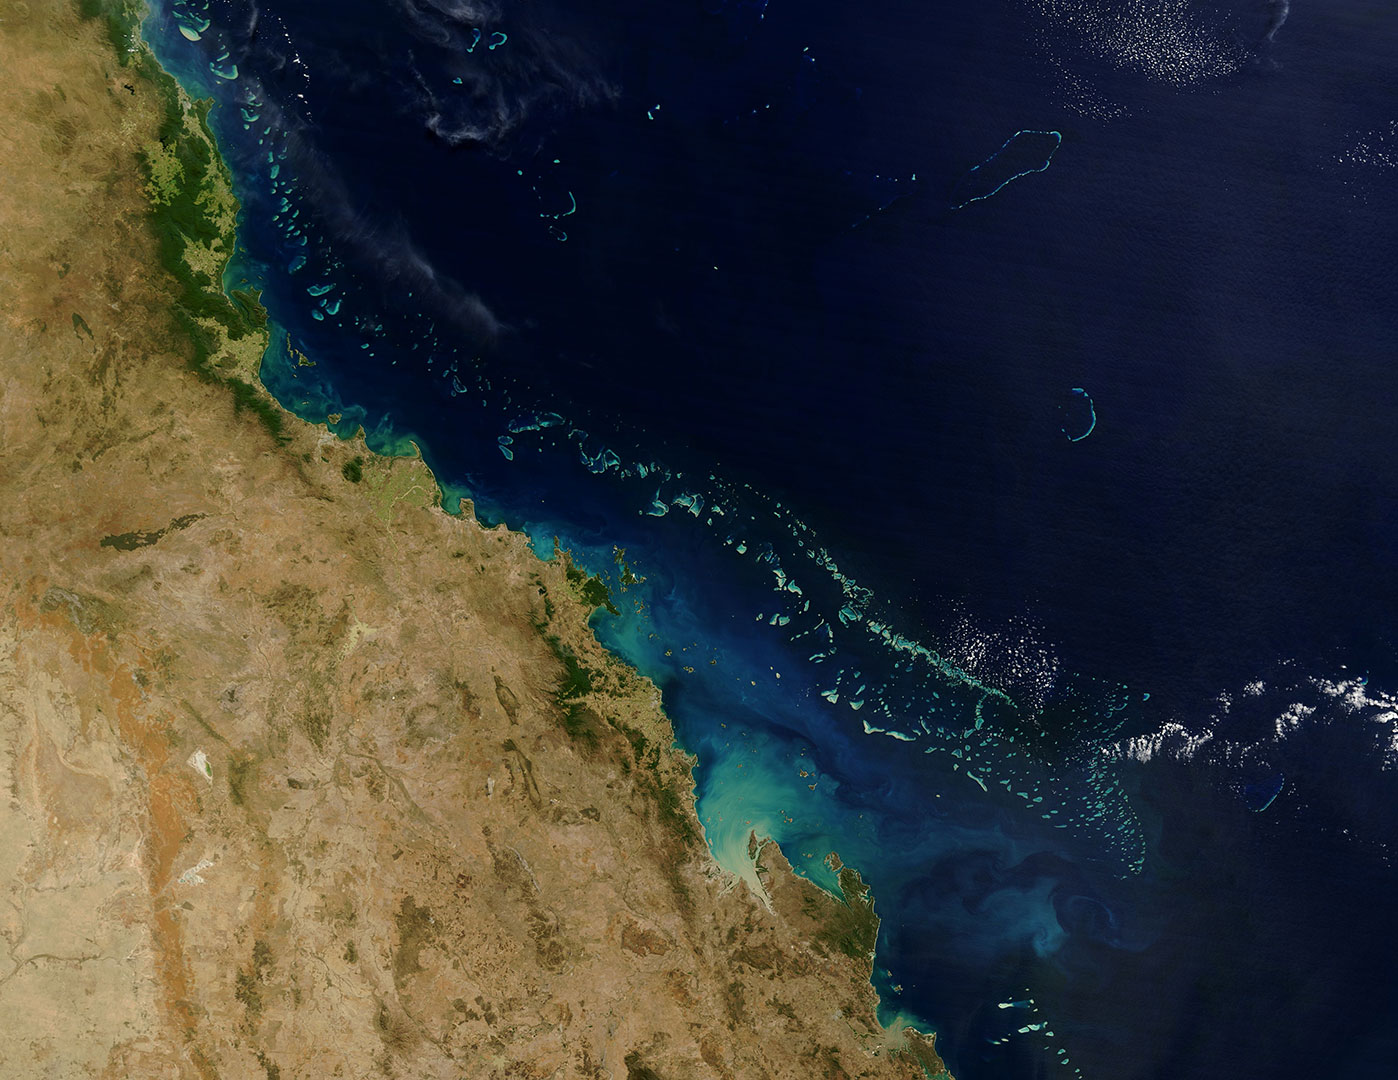 The Great Barrier Reef and Queensland coast viewed from outer space